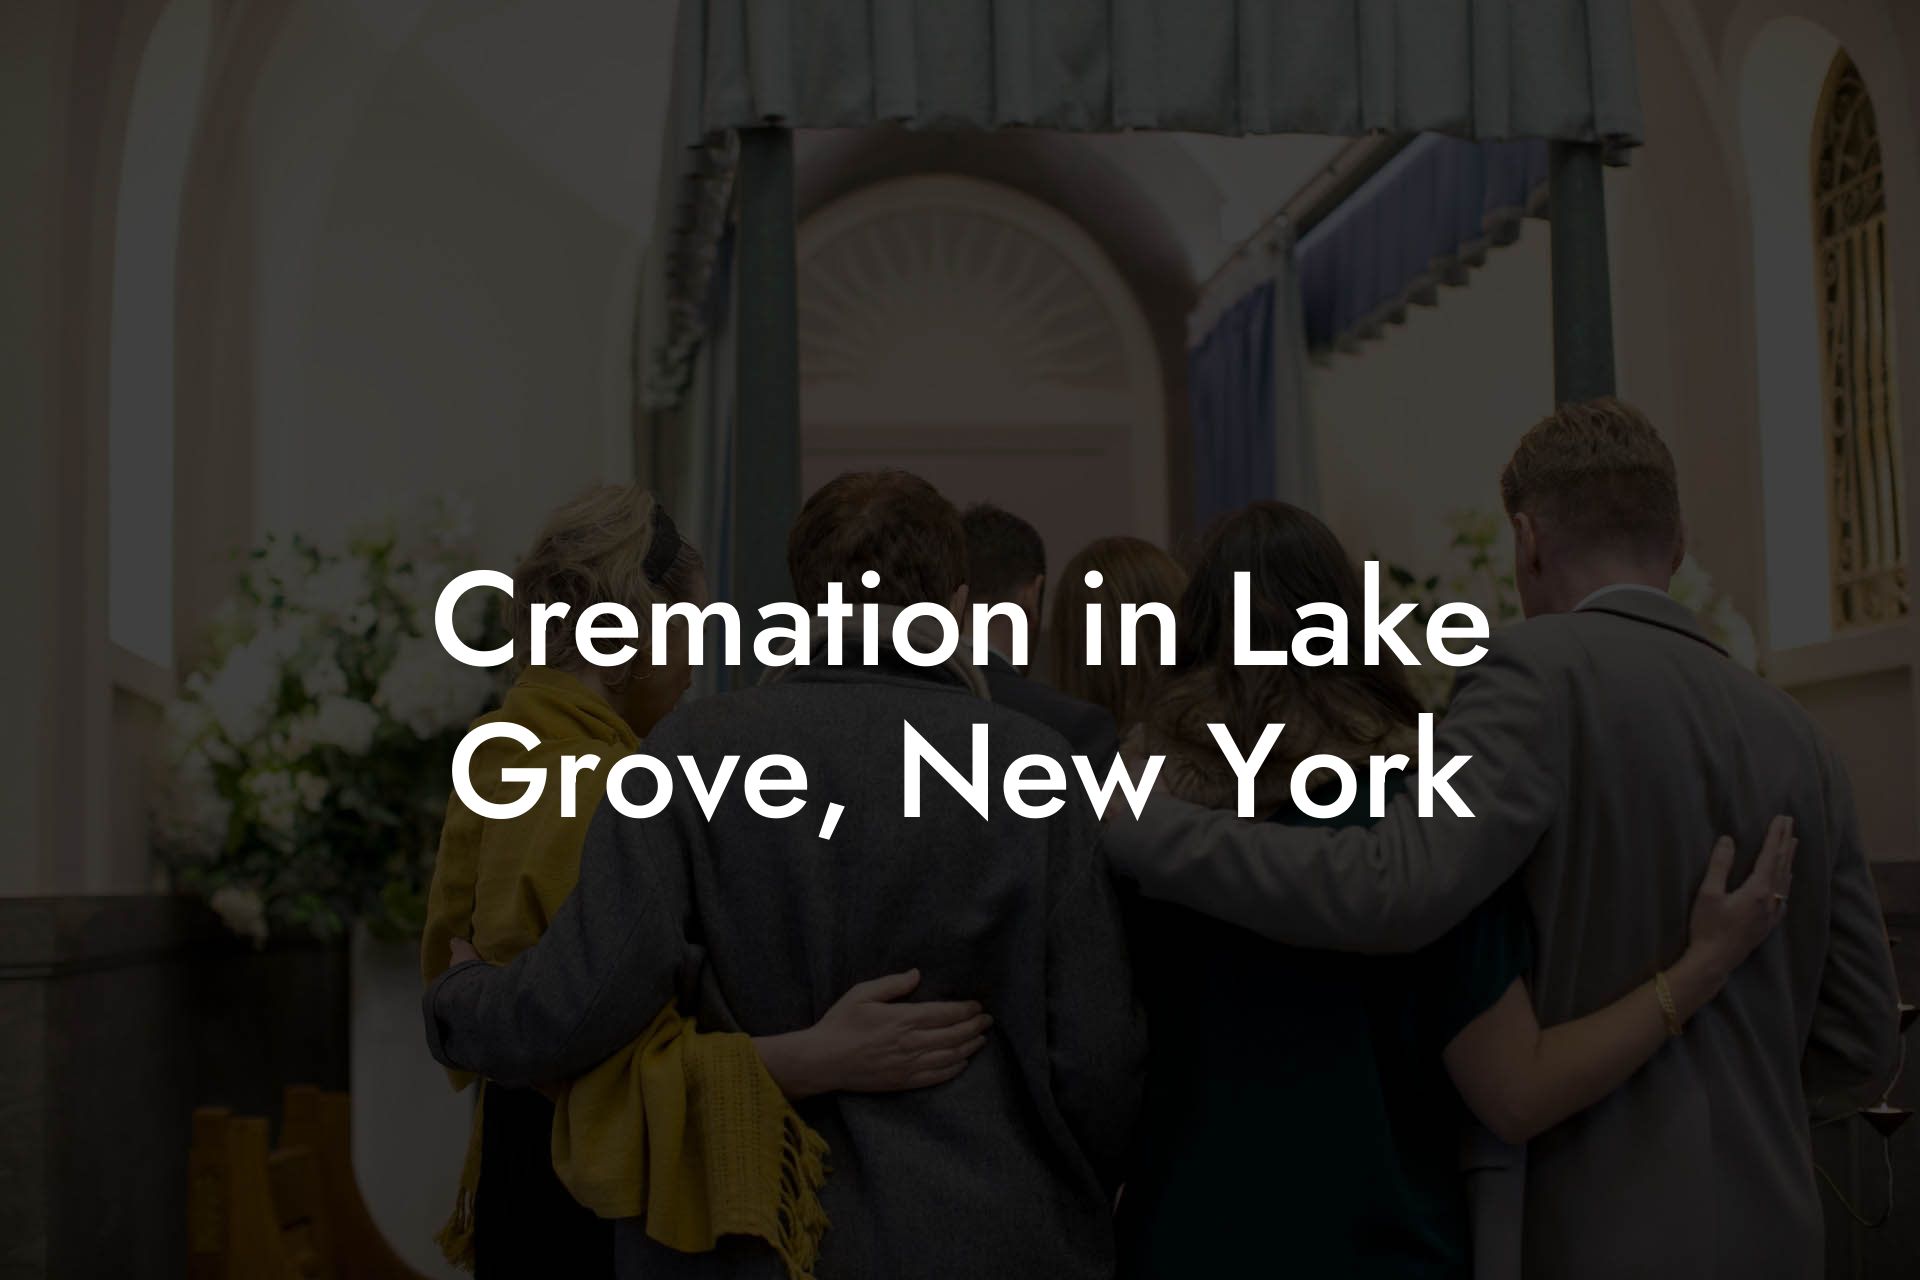 Cremation in Lake Grove, New York